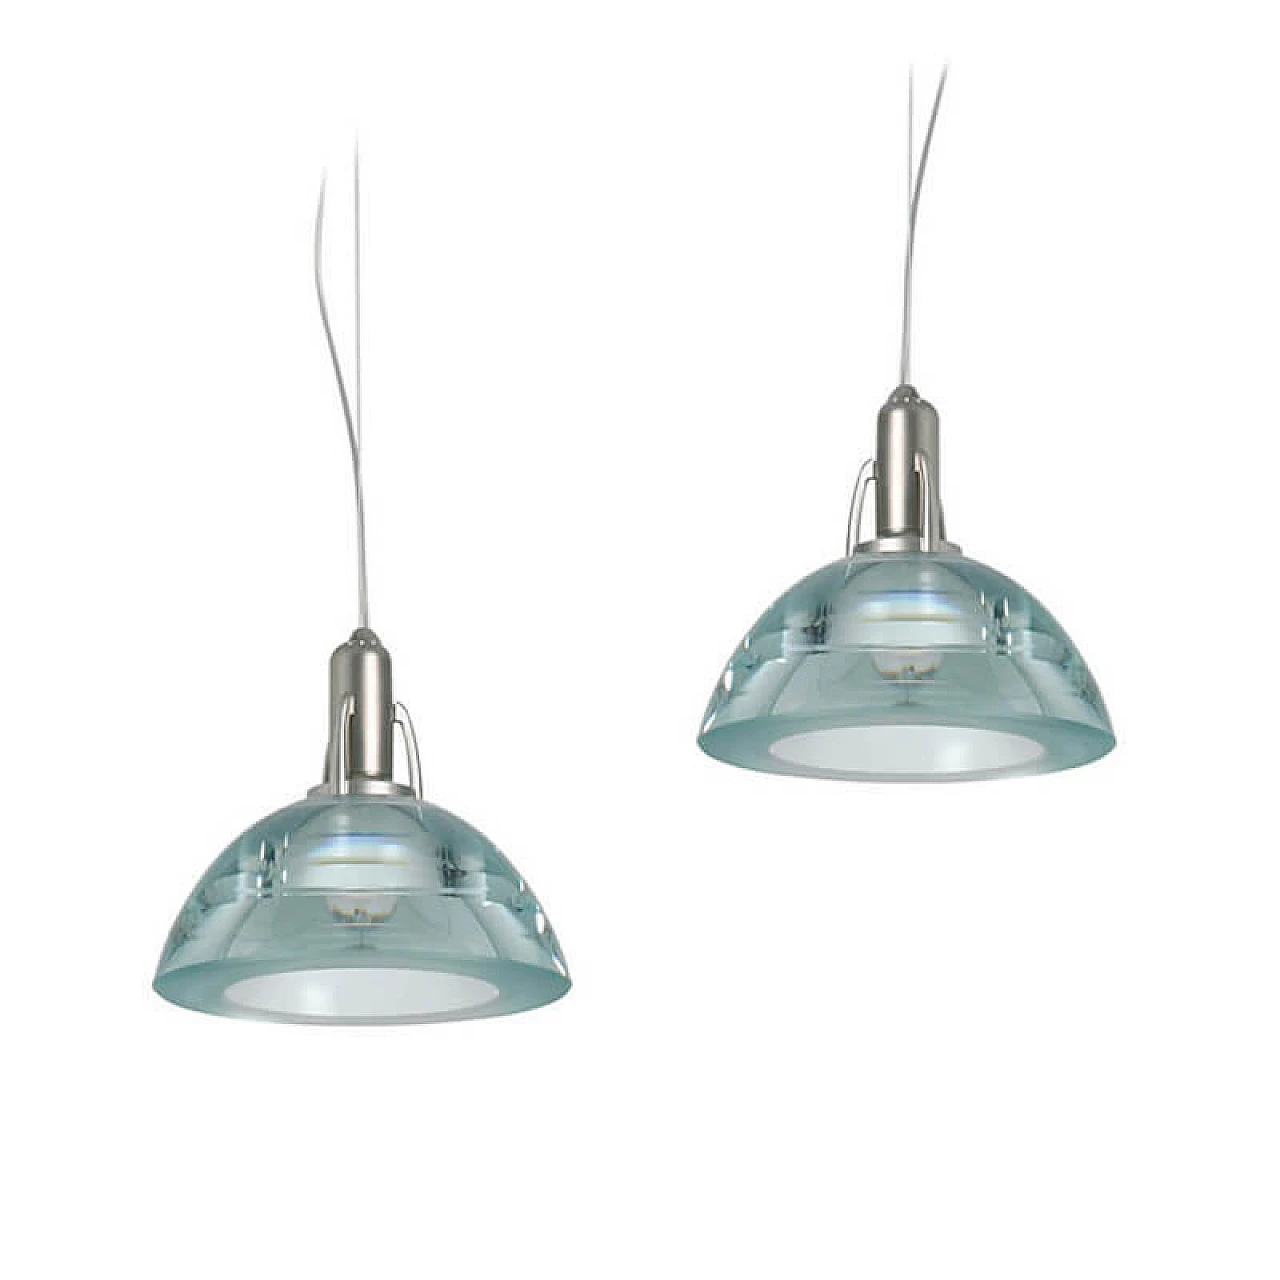 Pair of ceiling lamps Galileo, by Emanuele Ricci for Lumina 1075163